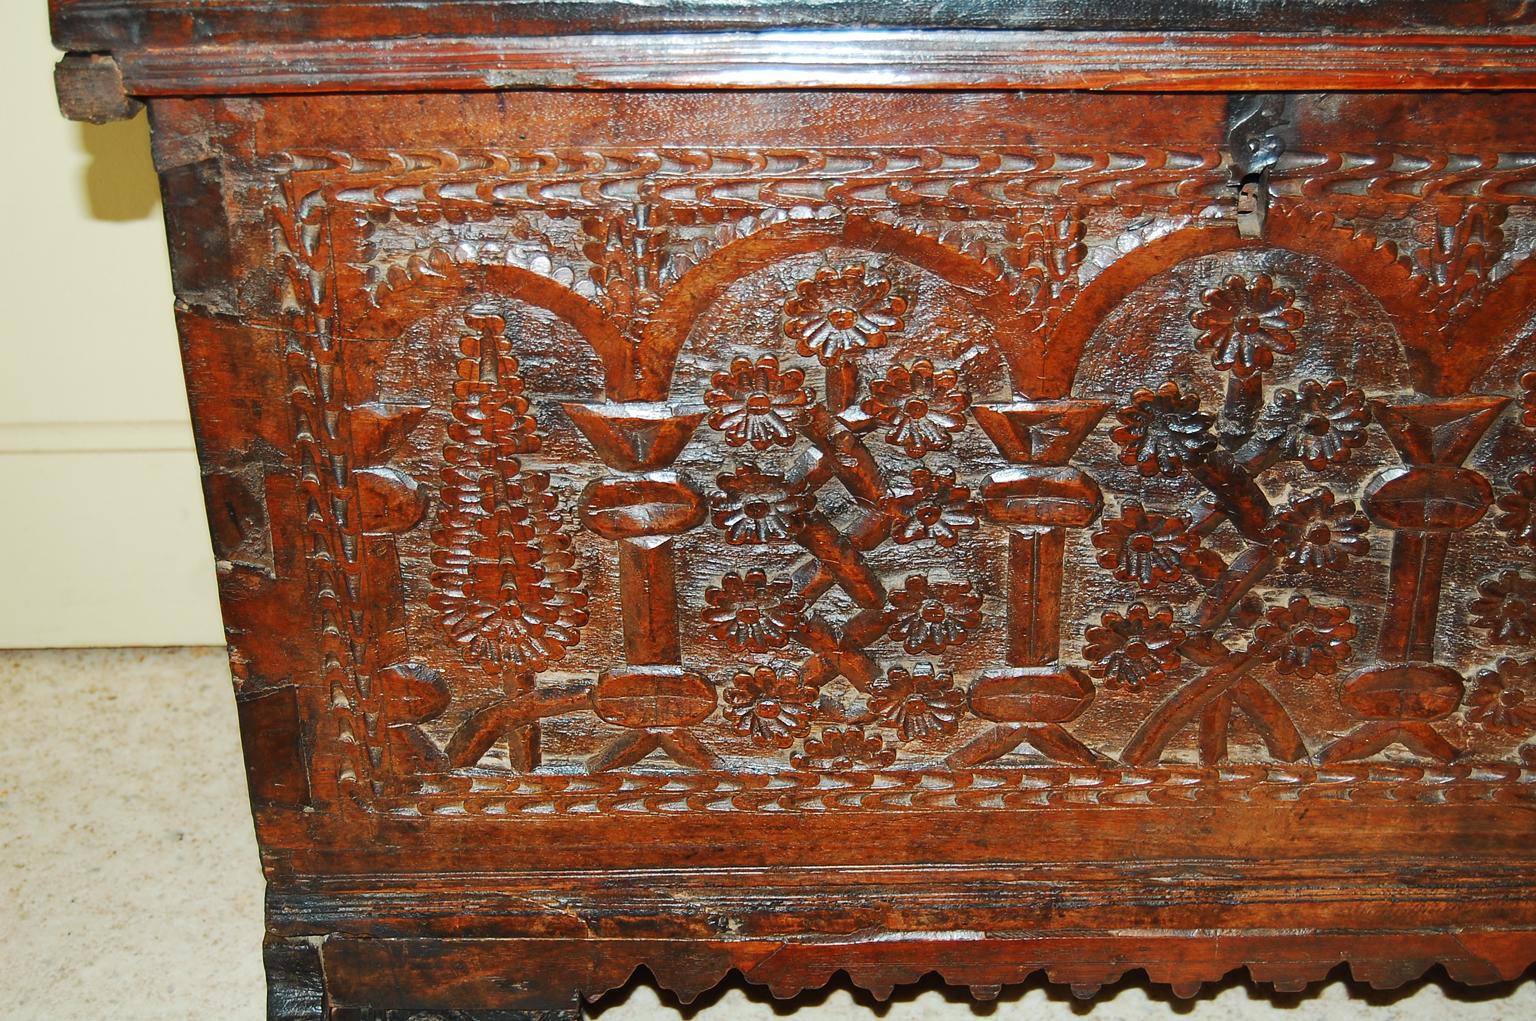 

  French 17th century baroque carved walnut coffer or blanket chest.  This quite early coffer is dovetailed with an extensively carved front of pine trees and blossoms arranged under classic arches and columns.   The three center arches contain